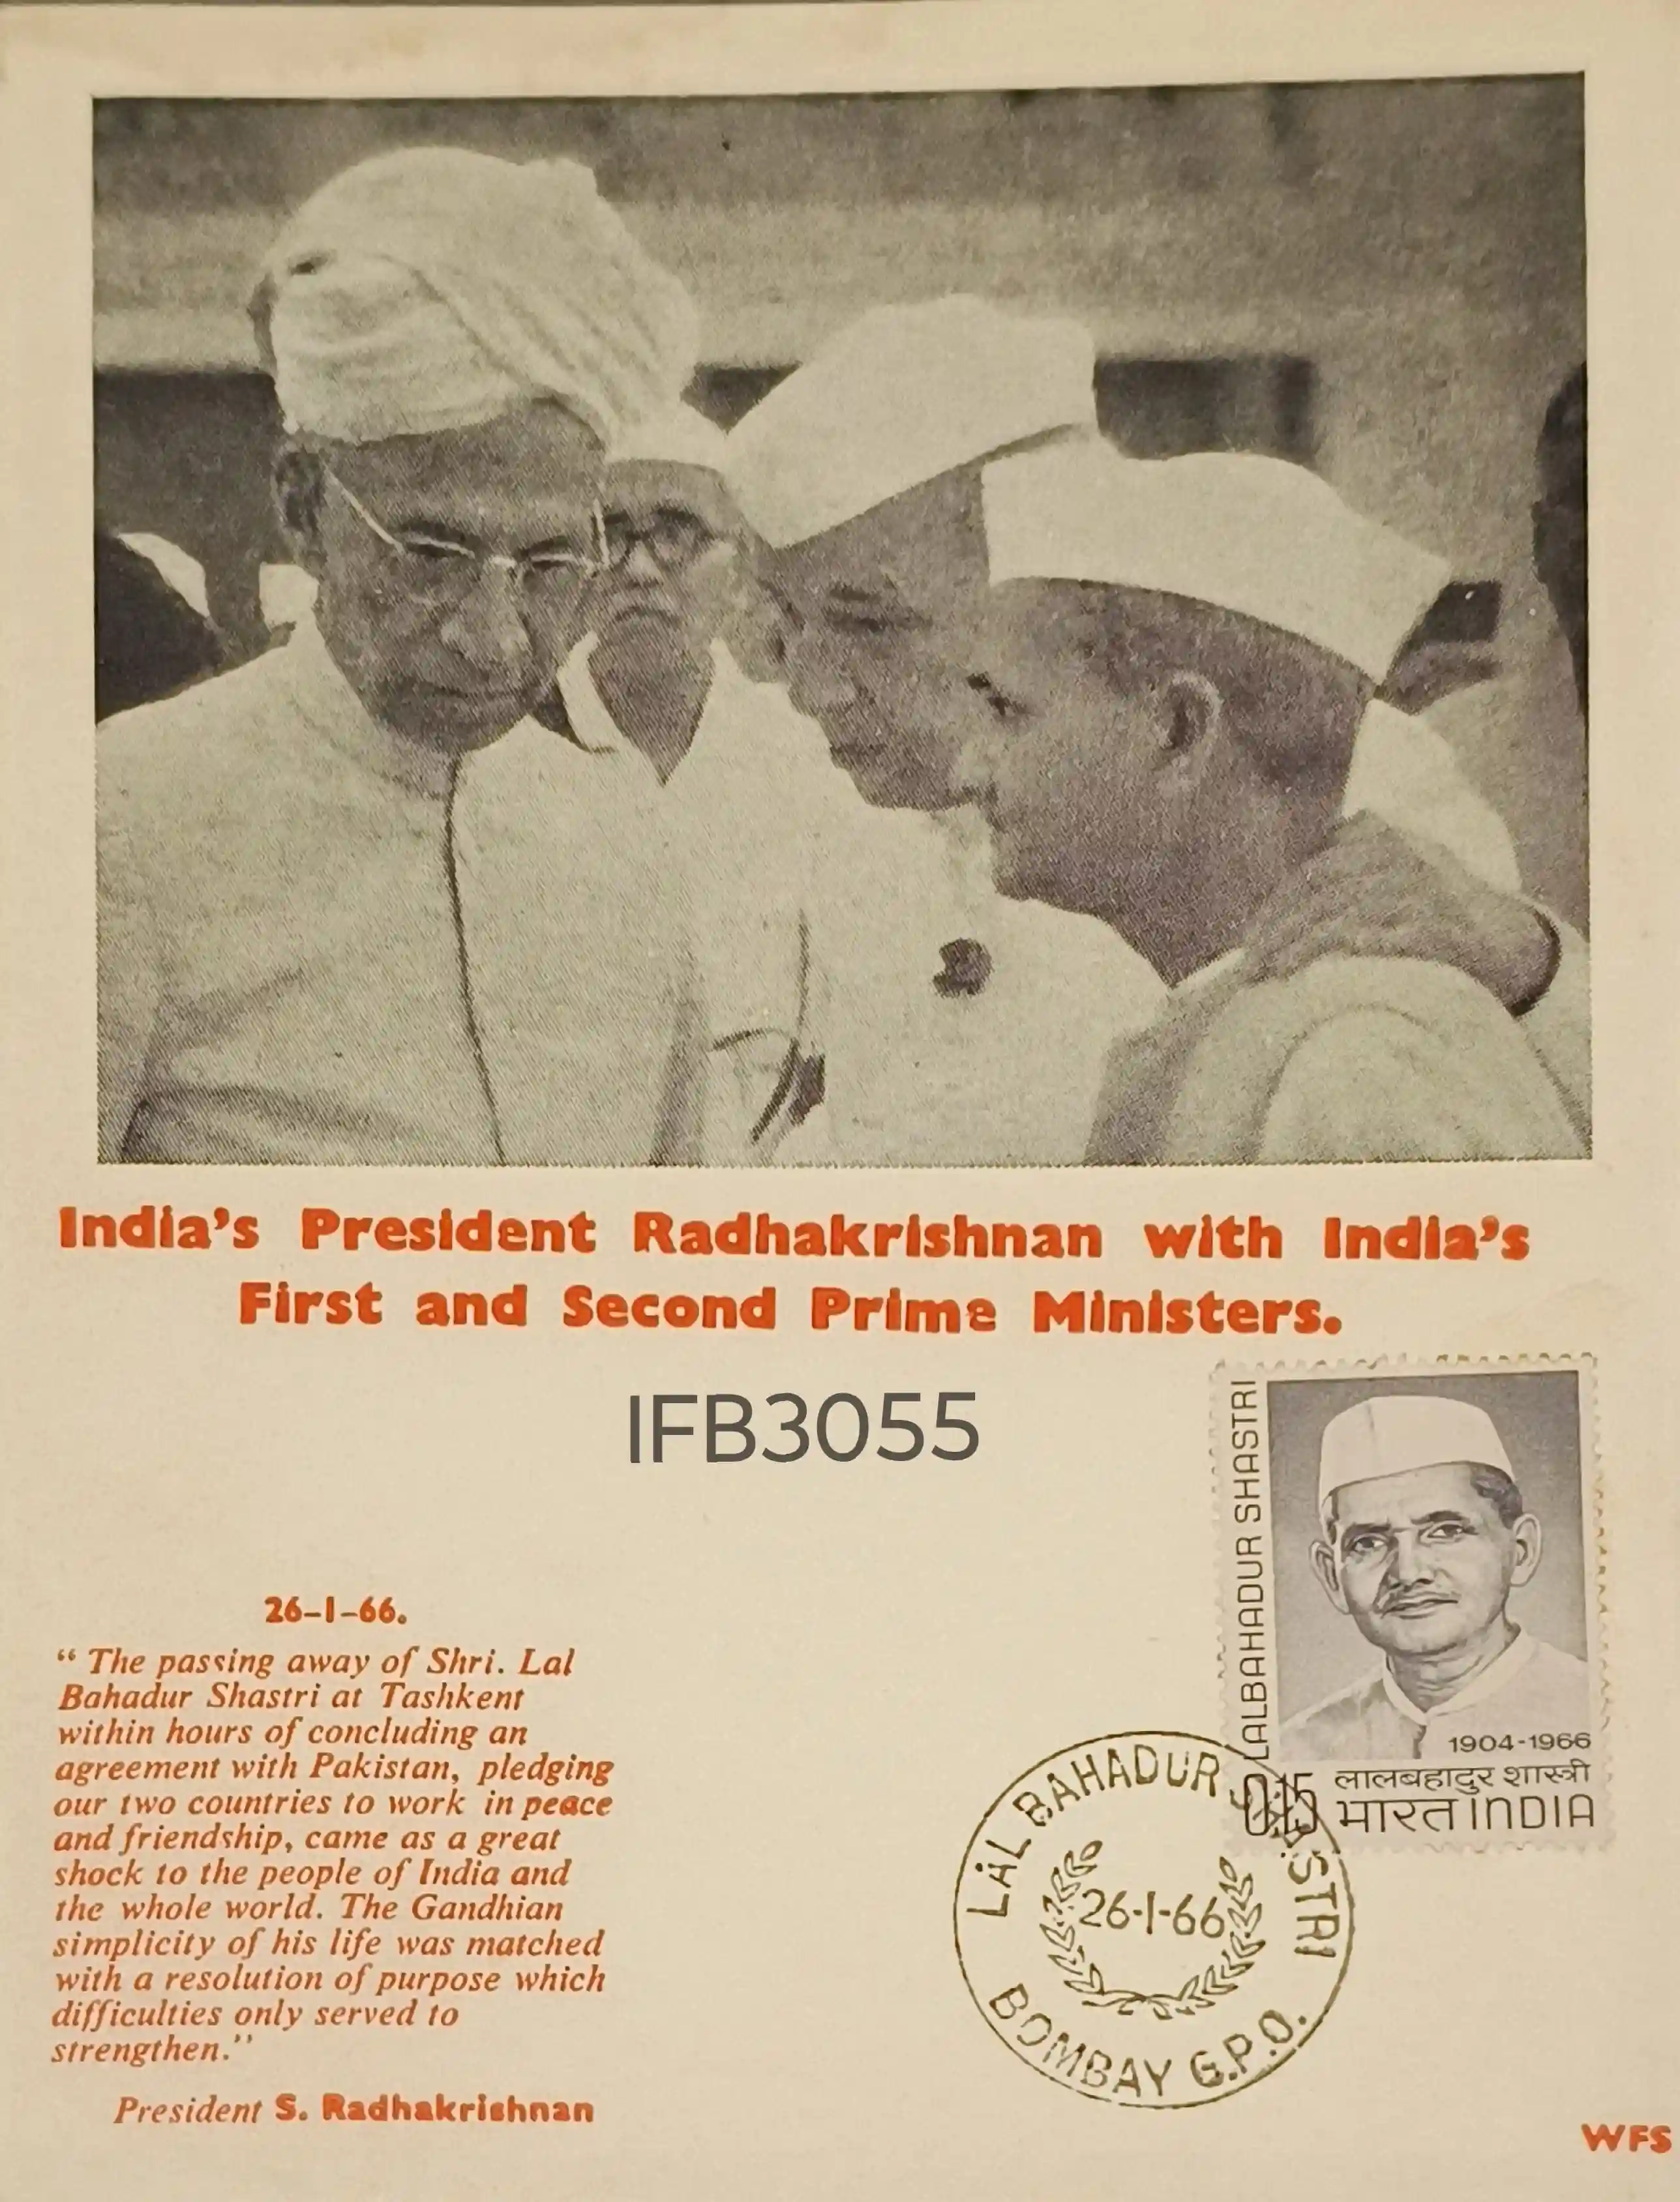 India 1966 President Radhakrihnana and Lal Bahadur Shastri Picture postcard Stamp tied and Bombay Cancelled Rare IFB03055